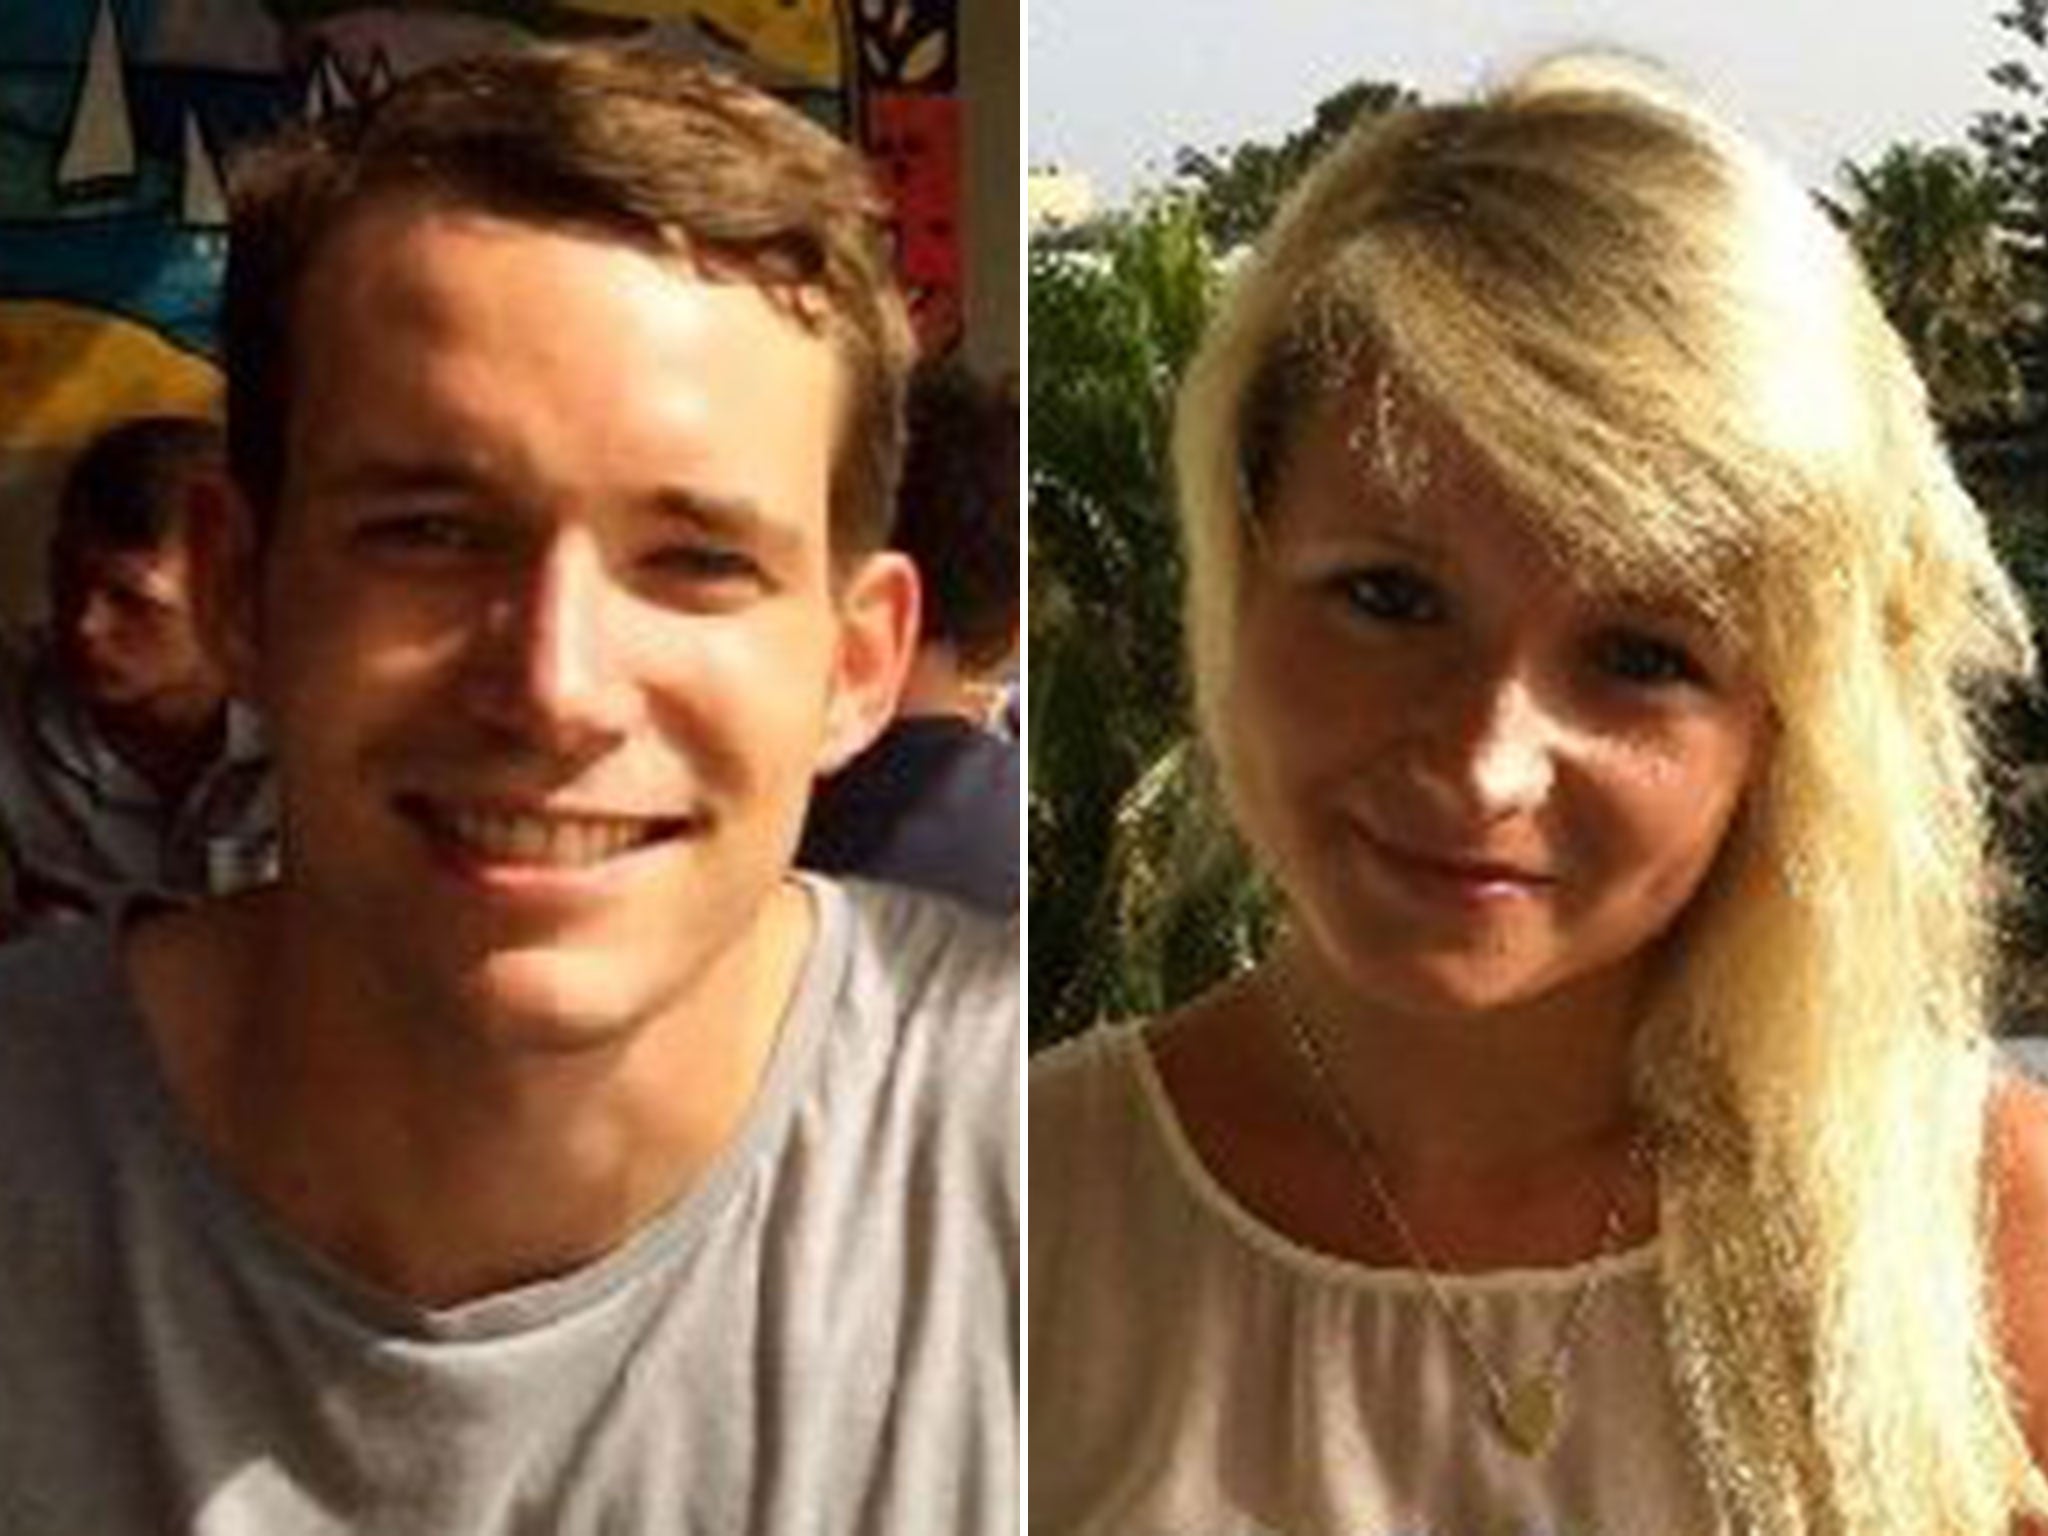 David Miller, 24, and Hannah Witheridge, 23 were killed on the small island of Koh Tao